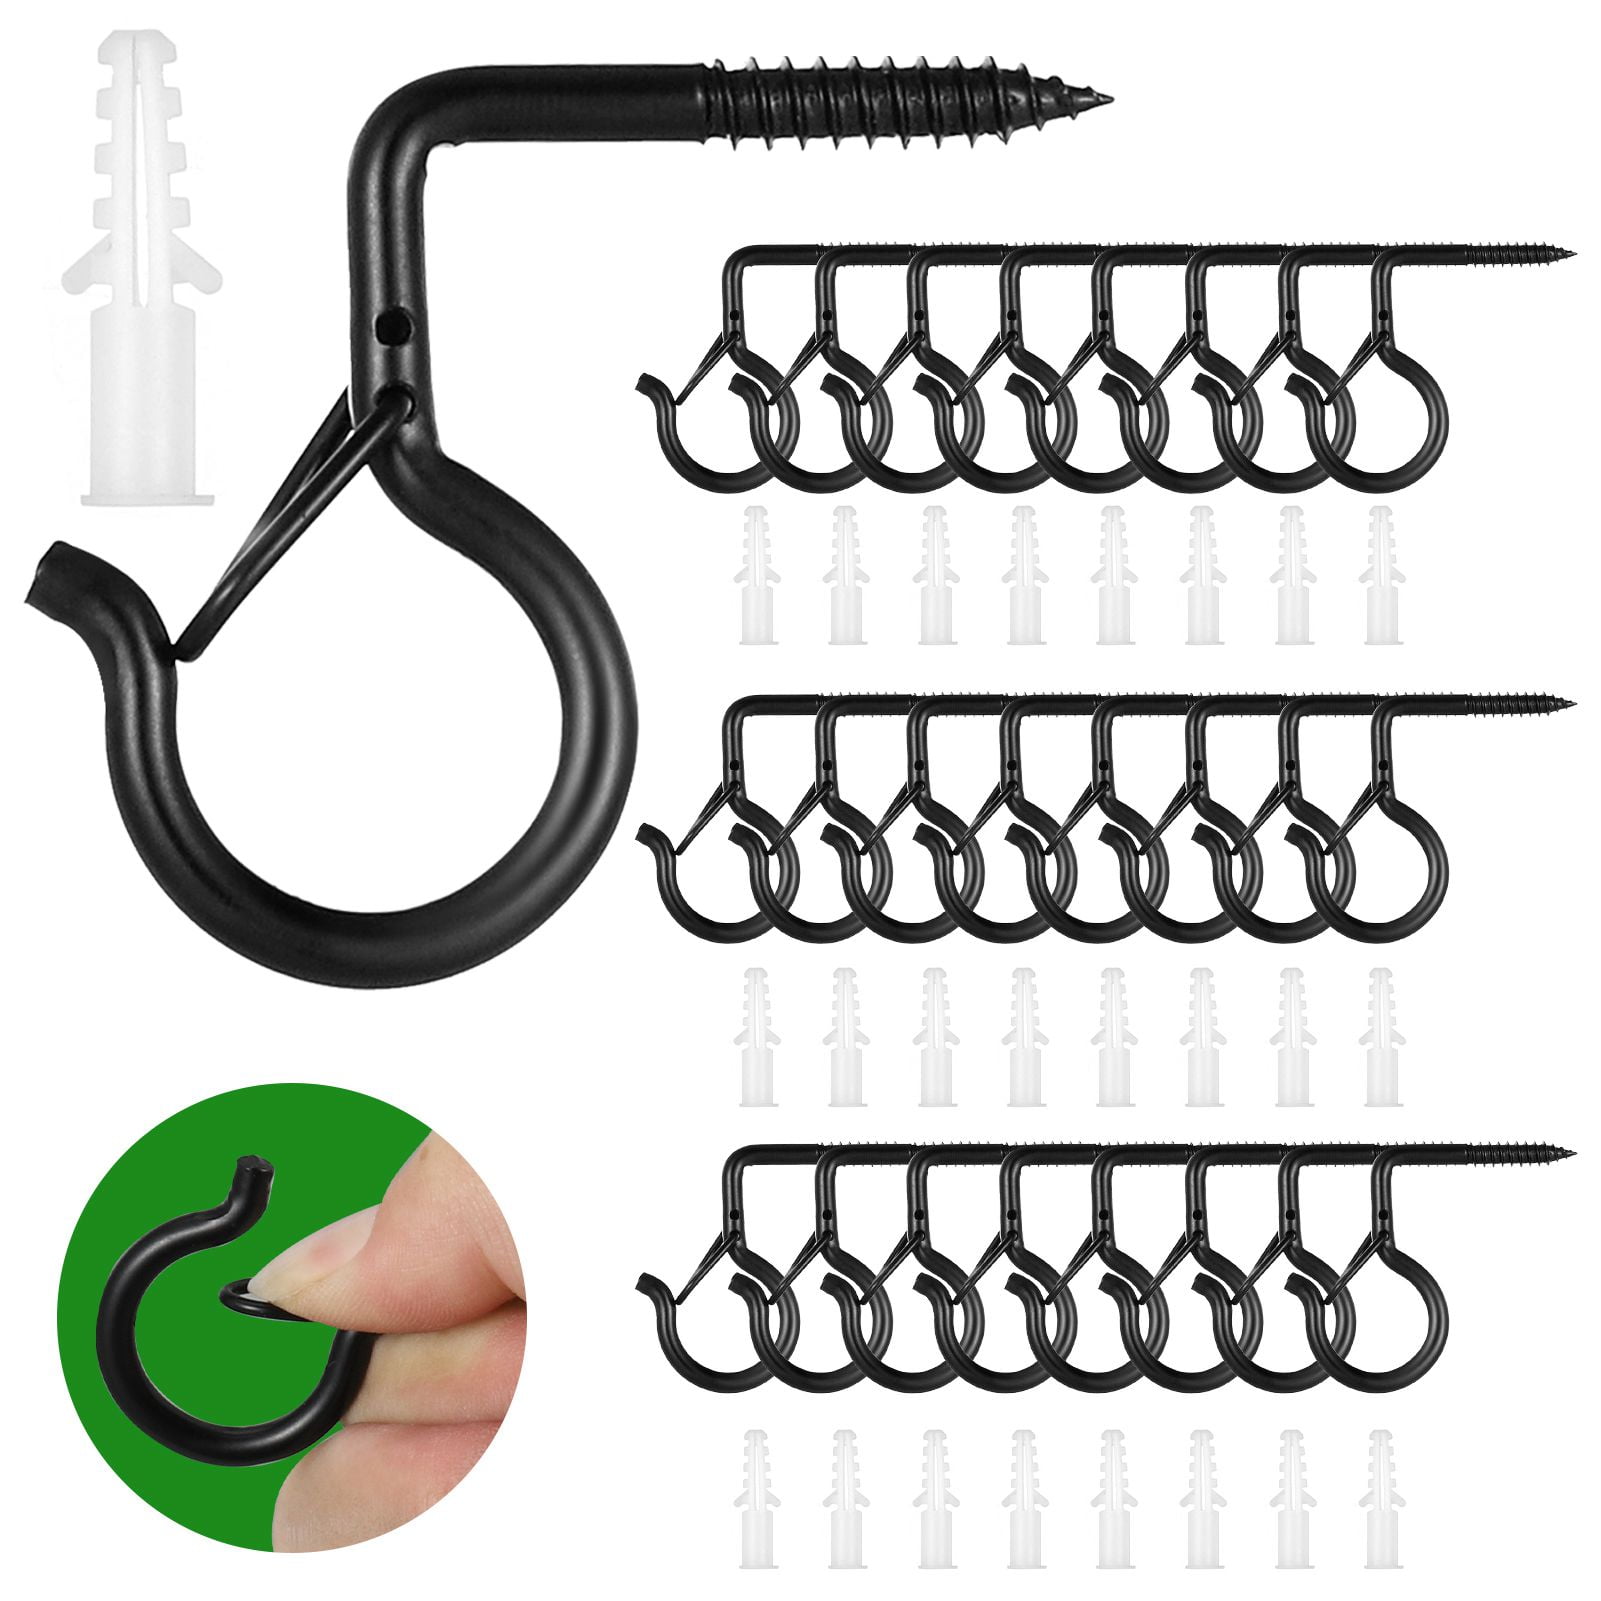 Mini Ceiling Screw Hooks, 200 Pieces 1/2 Inch Cup Hooks Screw-in Hooks for  Hanging Plants Mug Arts Decorations, Black 